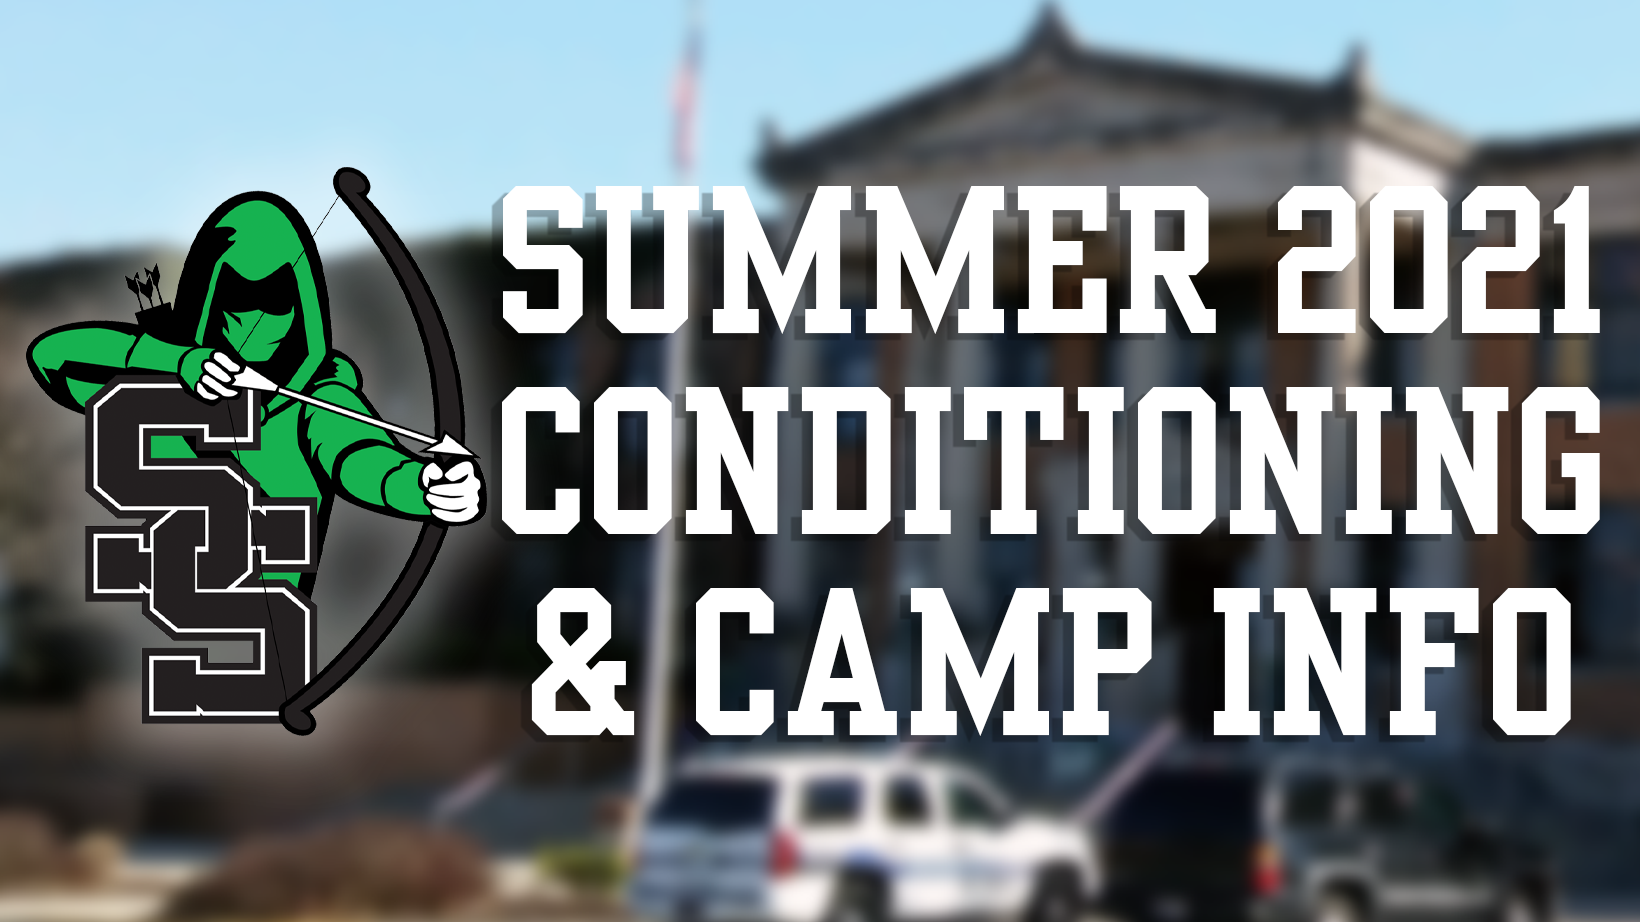 South Side Summer 2021 Conditioning & Camps Info